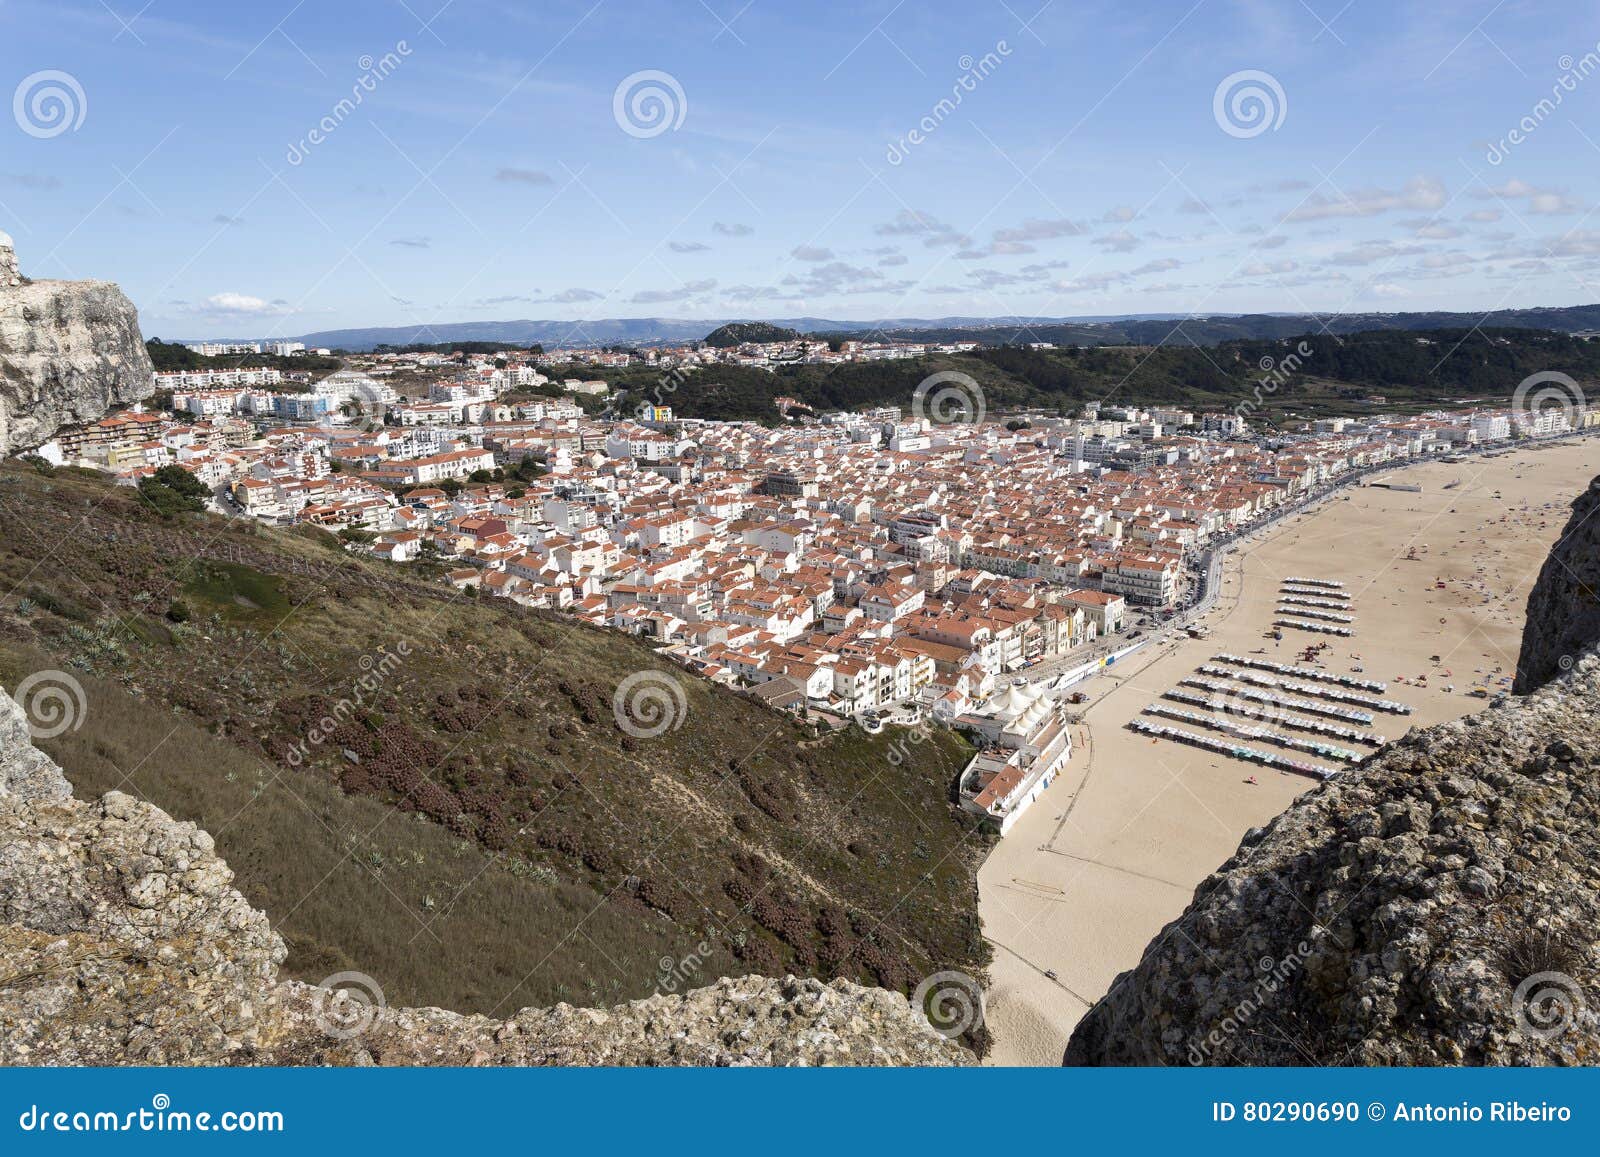 village of nazare seen from sitio